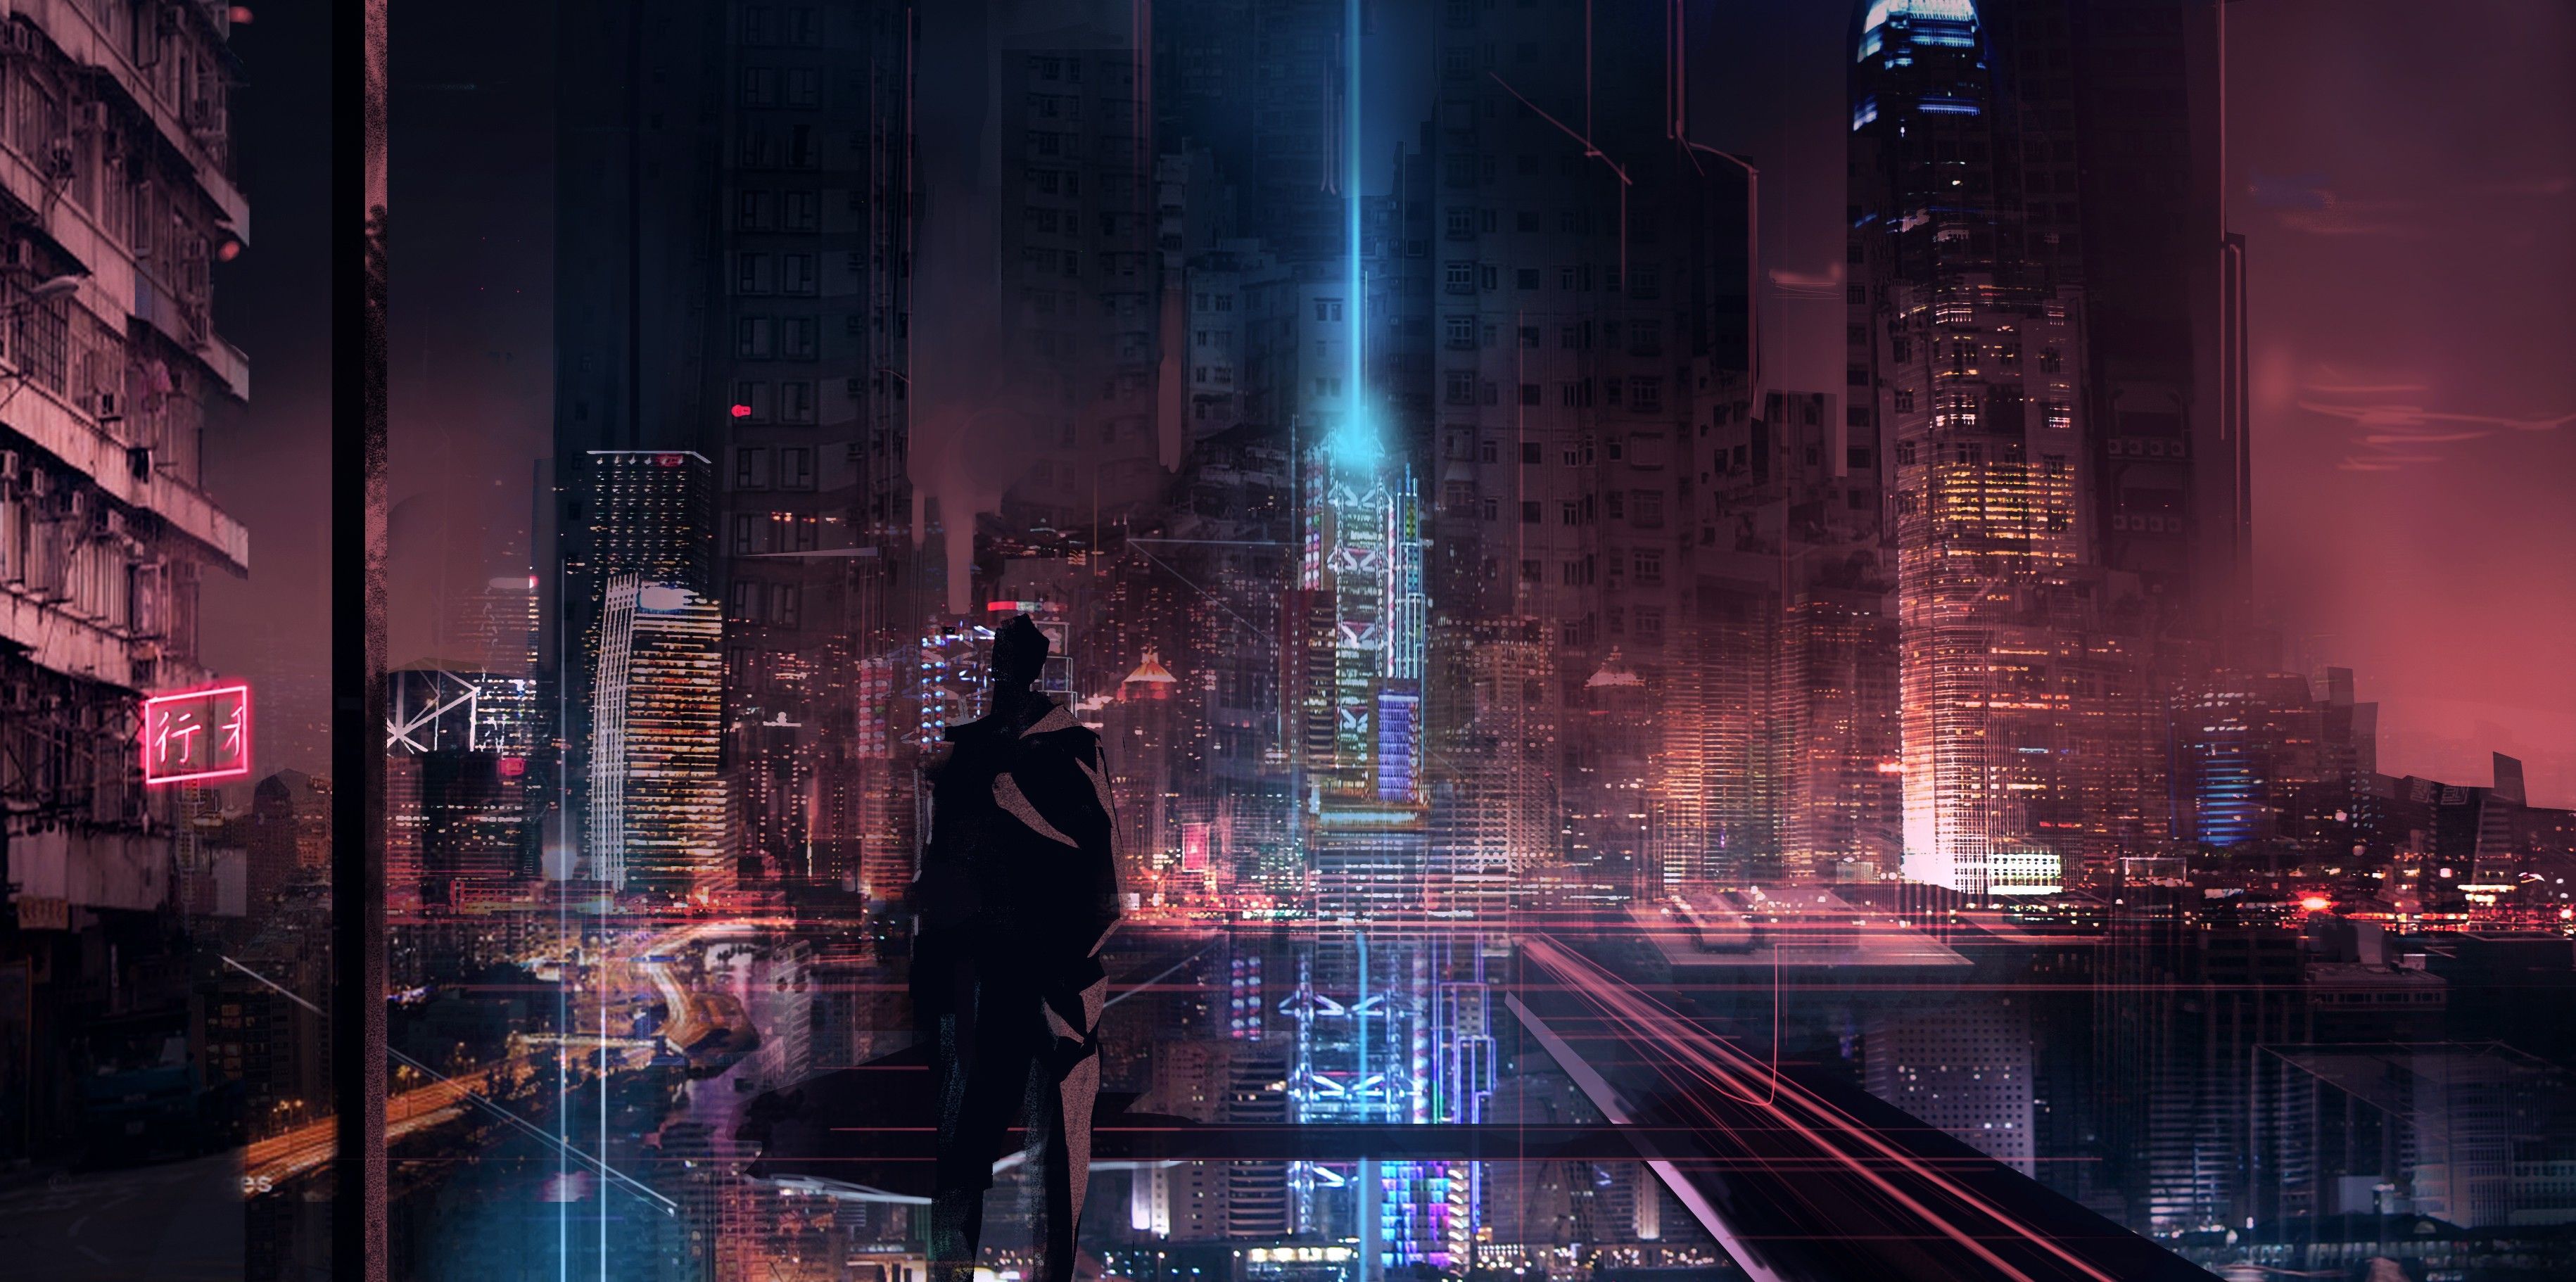 Cyber City Wallpaper Free Cyber City Background